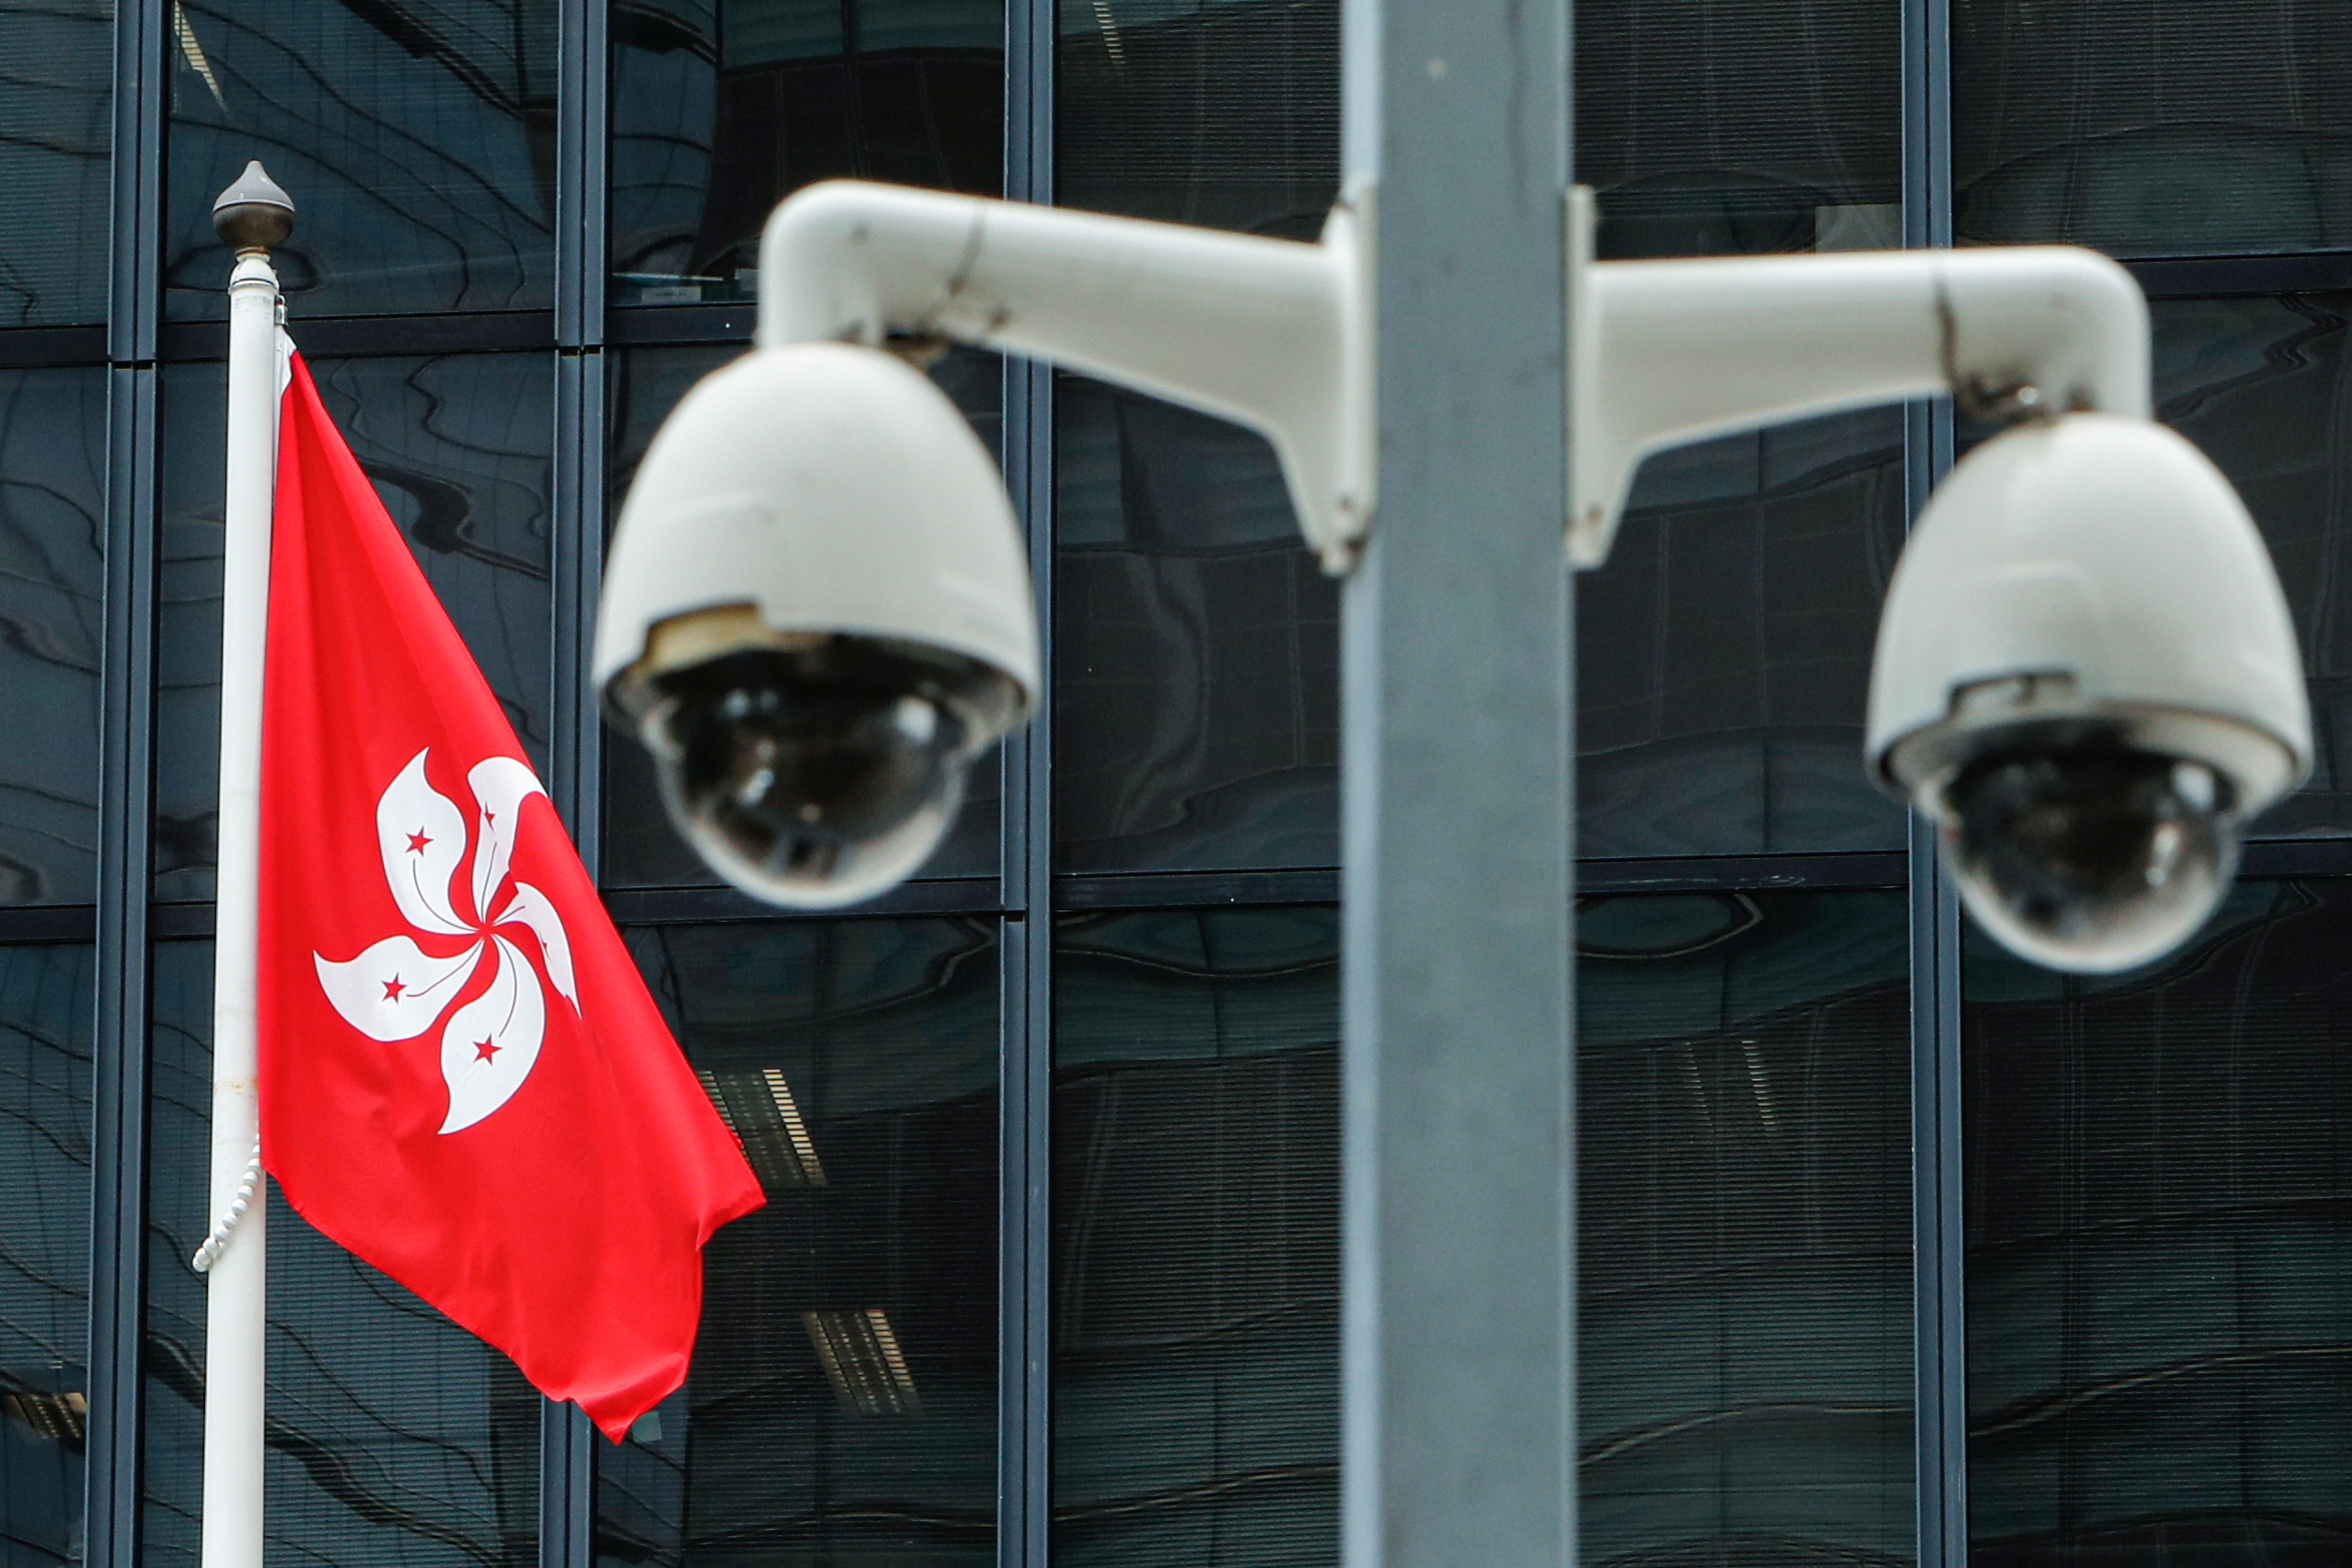 A Hong Kong flag is flown behind a pair of surveillance cameras outside the Central Government Offices in Hong Kong, China July 20, 2020. REUTERS/Tyrone Siu